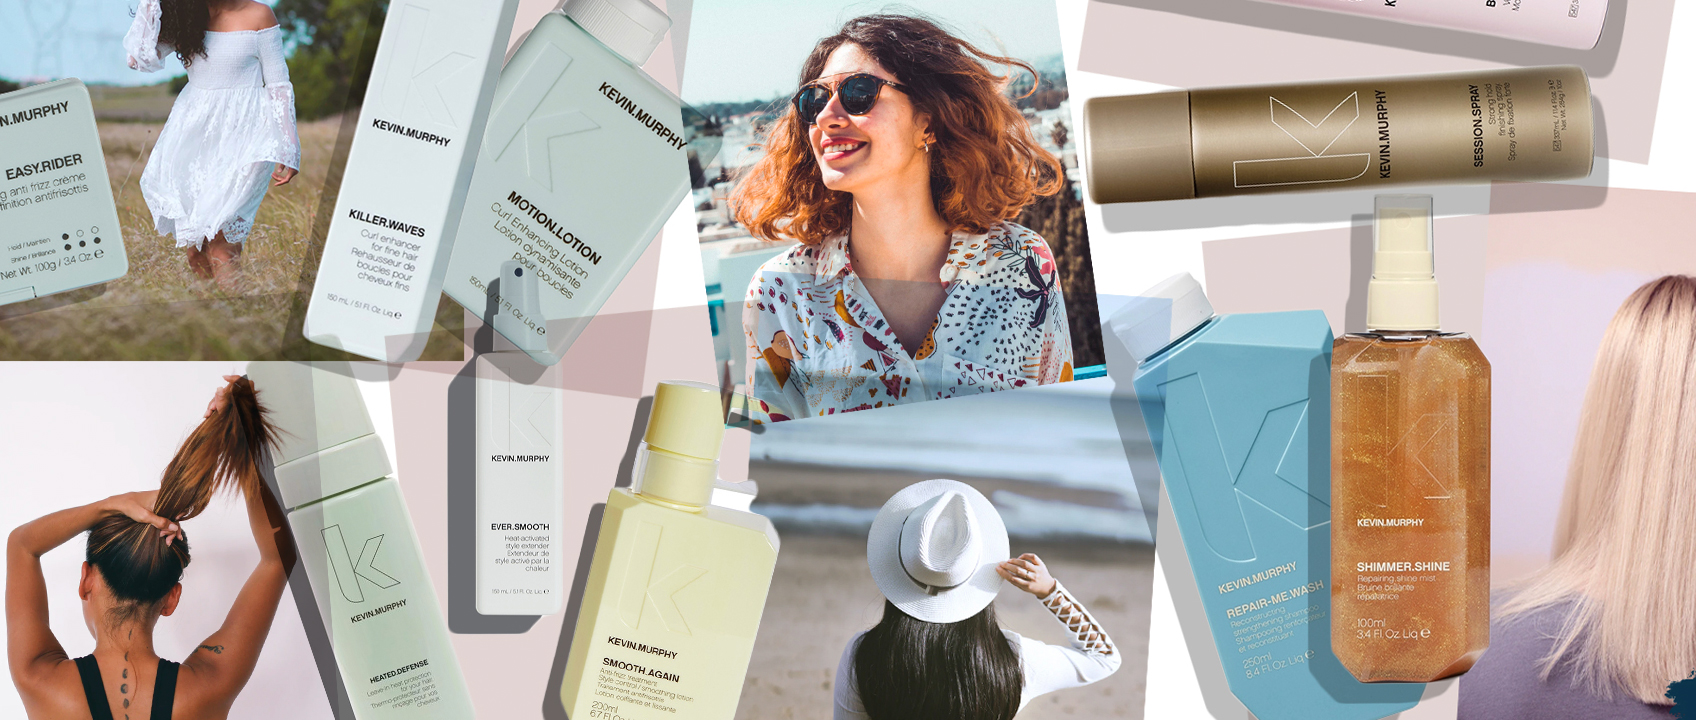 Lore's ultimate guide to Kevin Murphy - Lore Perfumery